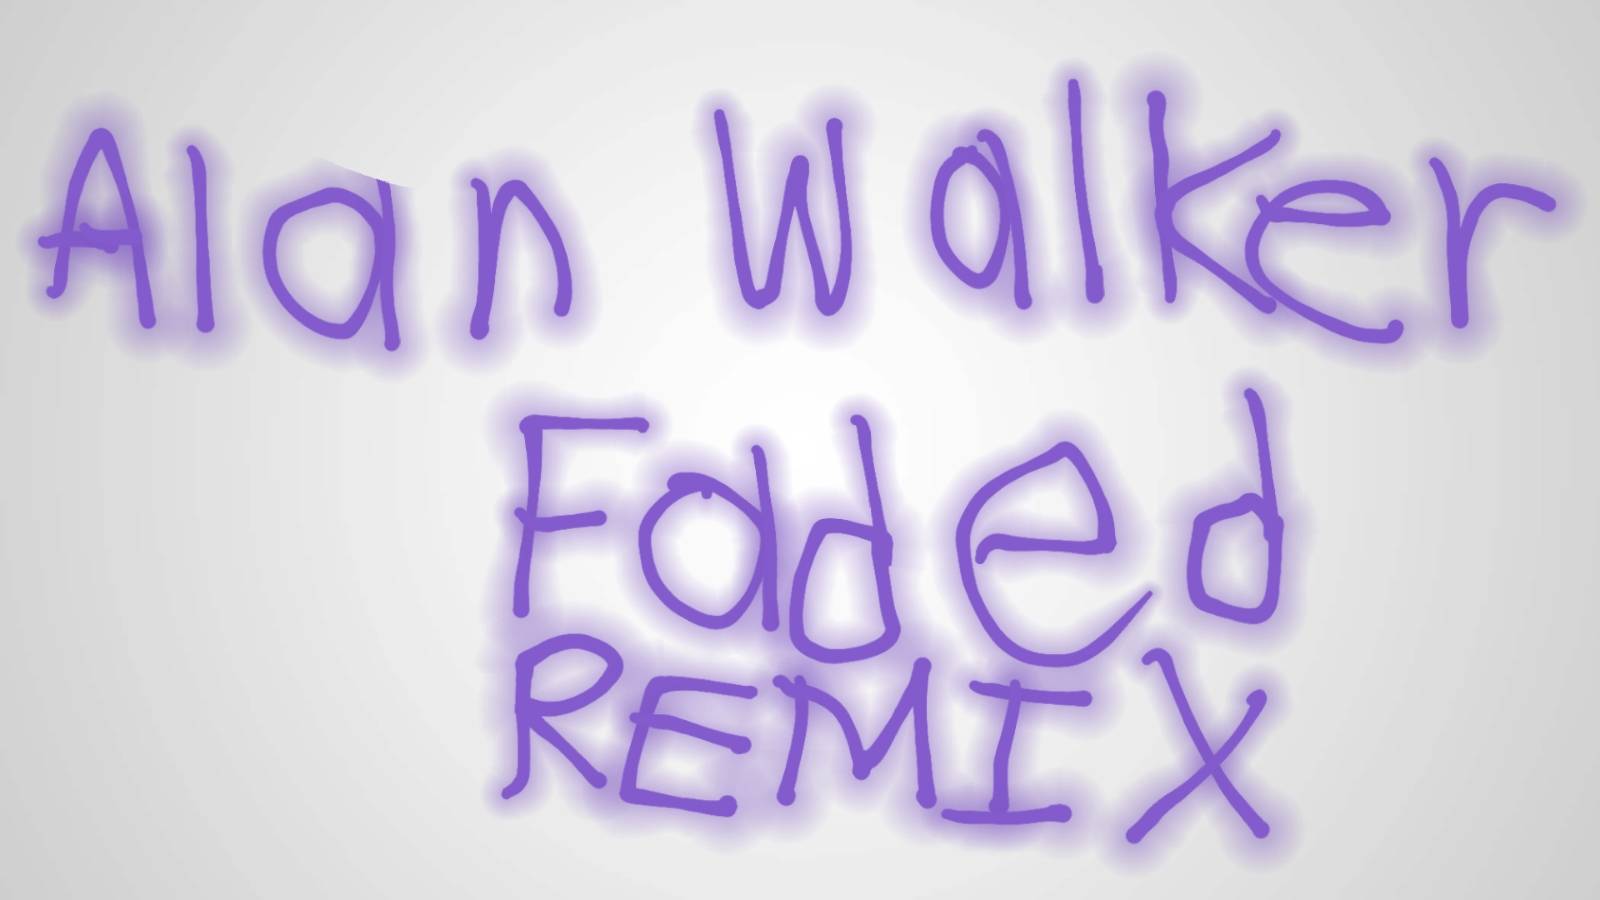 A Drawing Of Alan Walker Faded Remix By Cattboyy08 On Deviantart